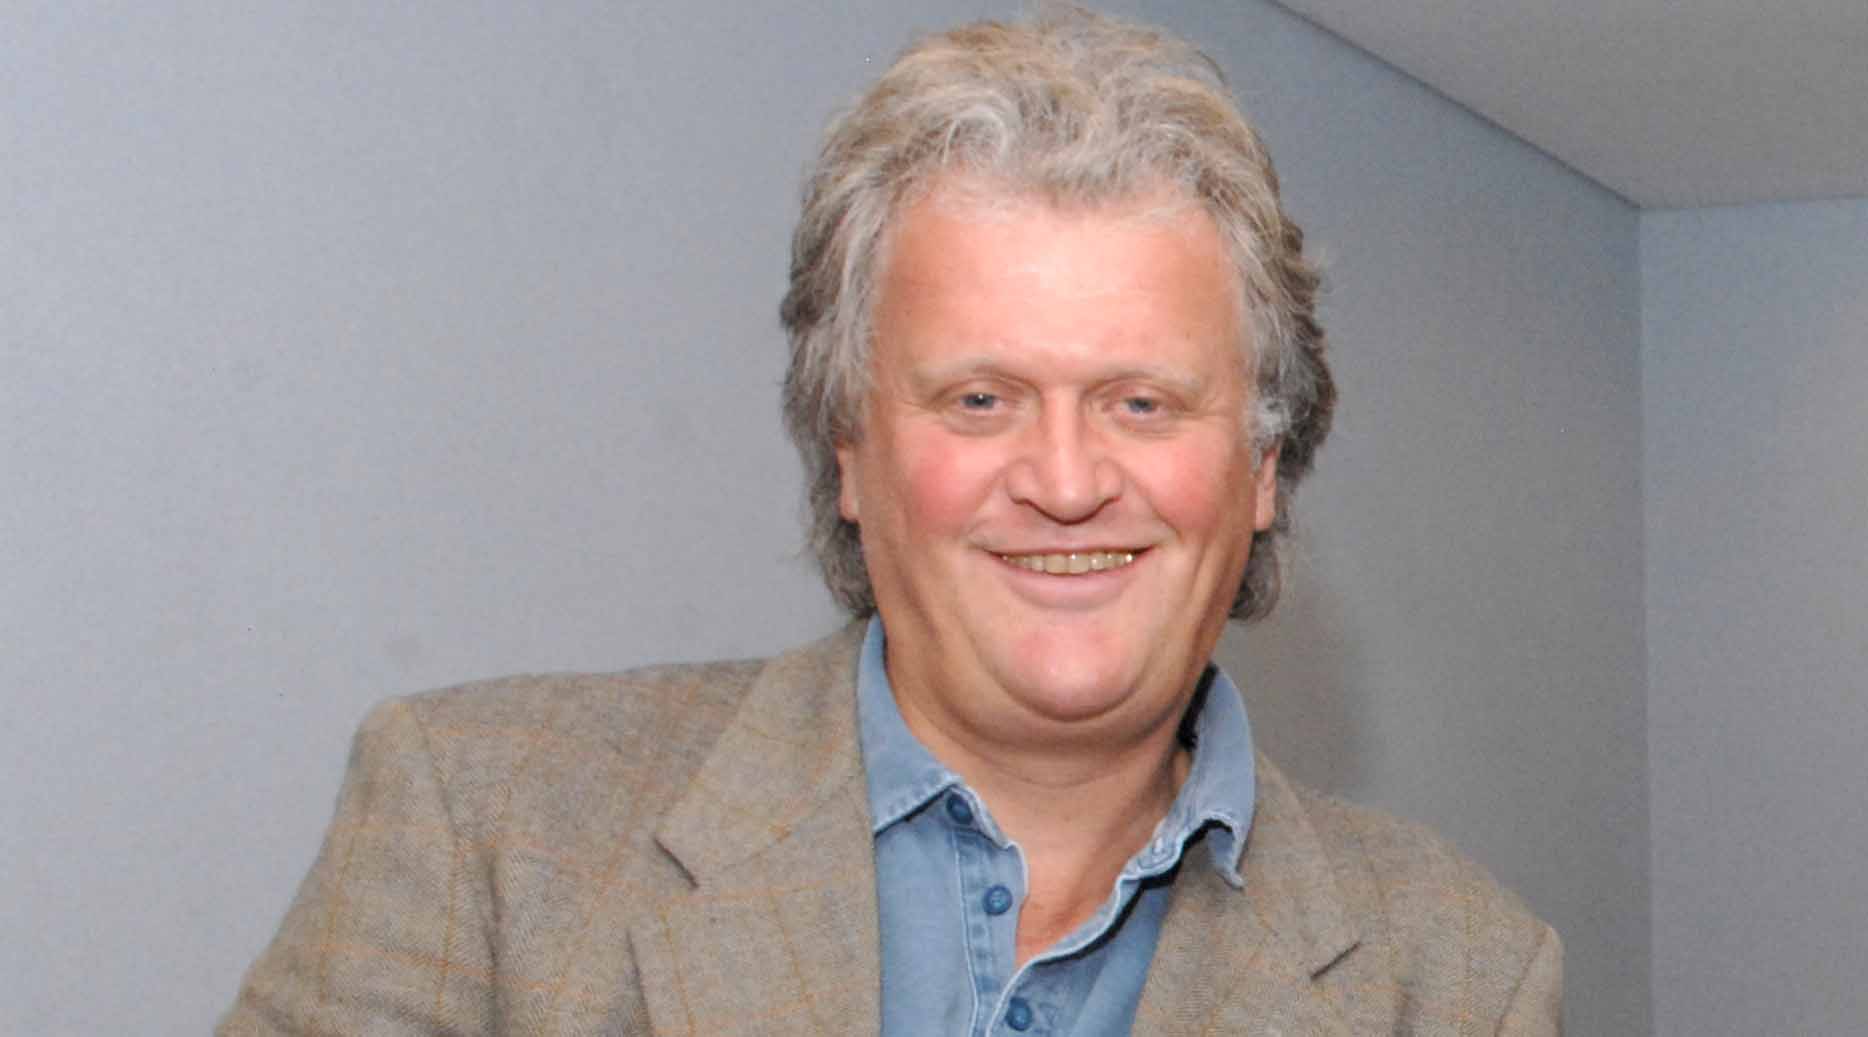 “Hopefully the new pub will act as a catalyst for other businesses to invest in Carlow,” commented Wetherspoon Founder and Chairman Tim Martin.